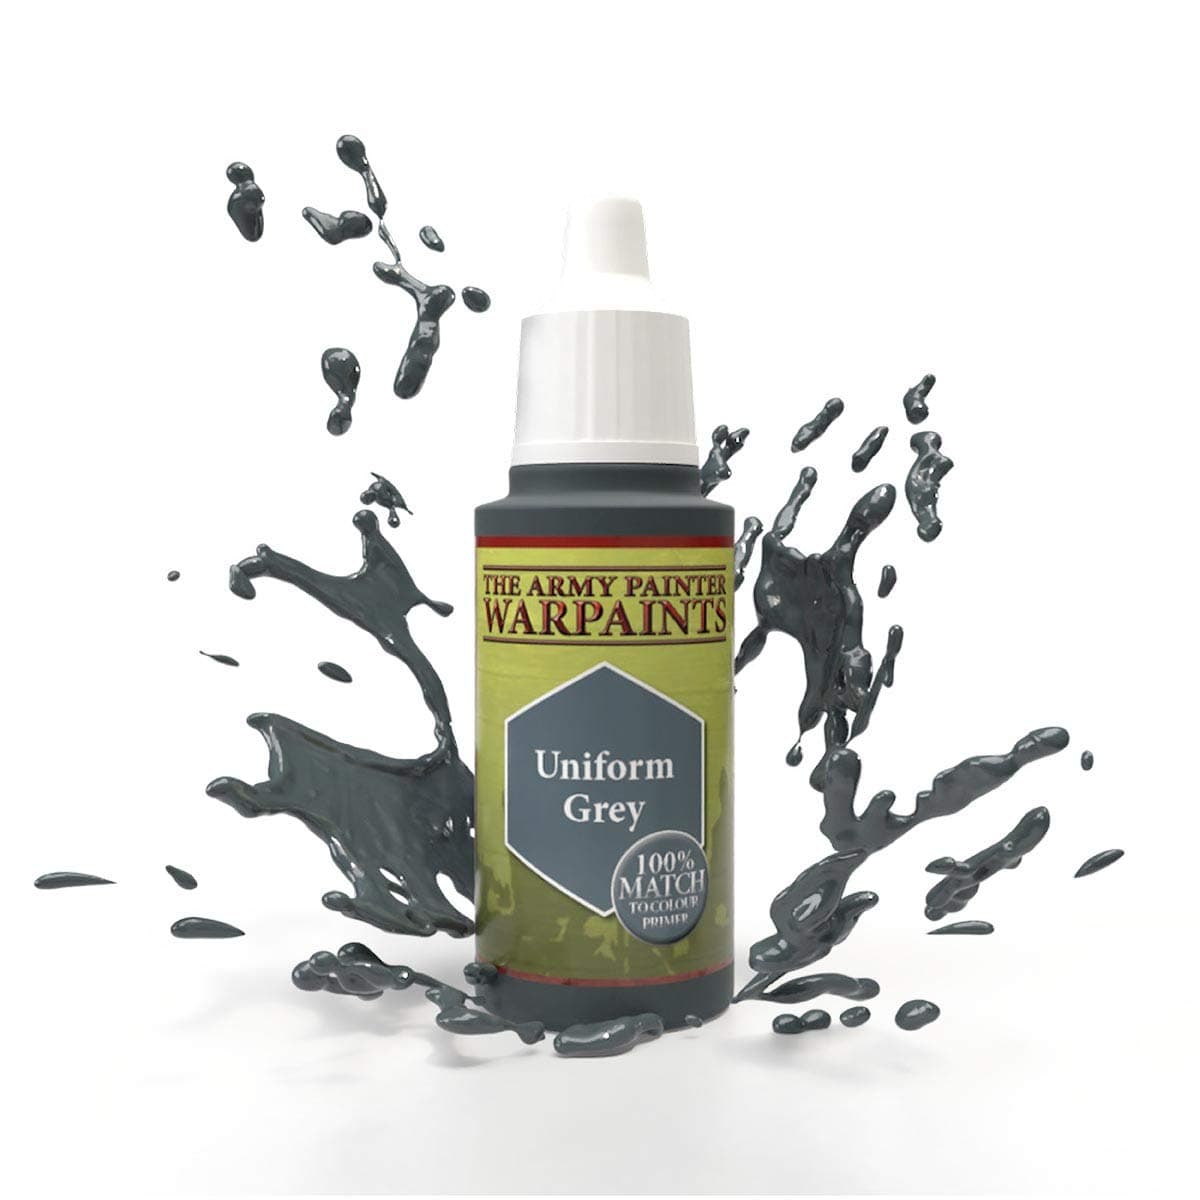 The Army Painter Accessories The Army Painter Warpaints: Uniform Grey 18ml